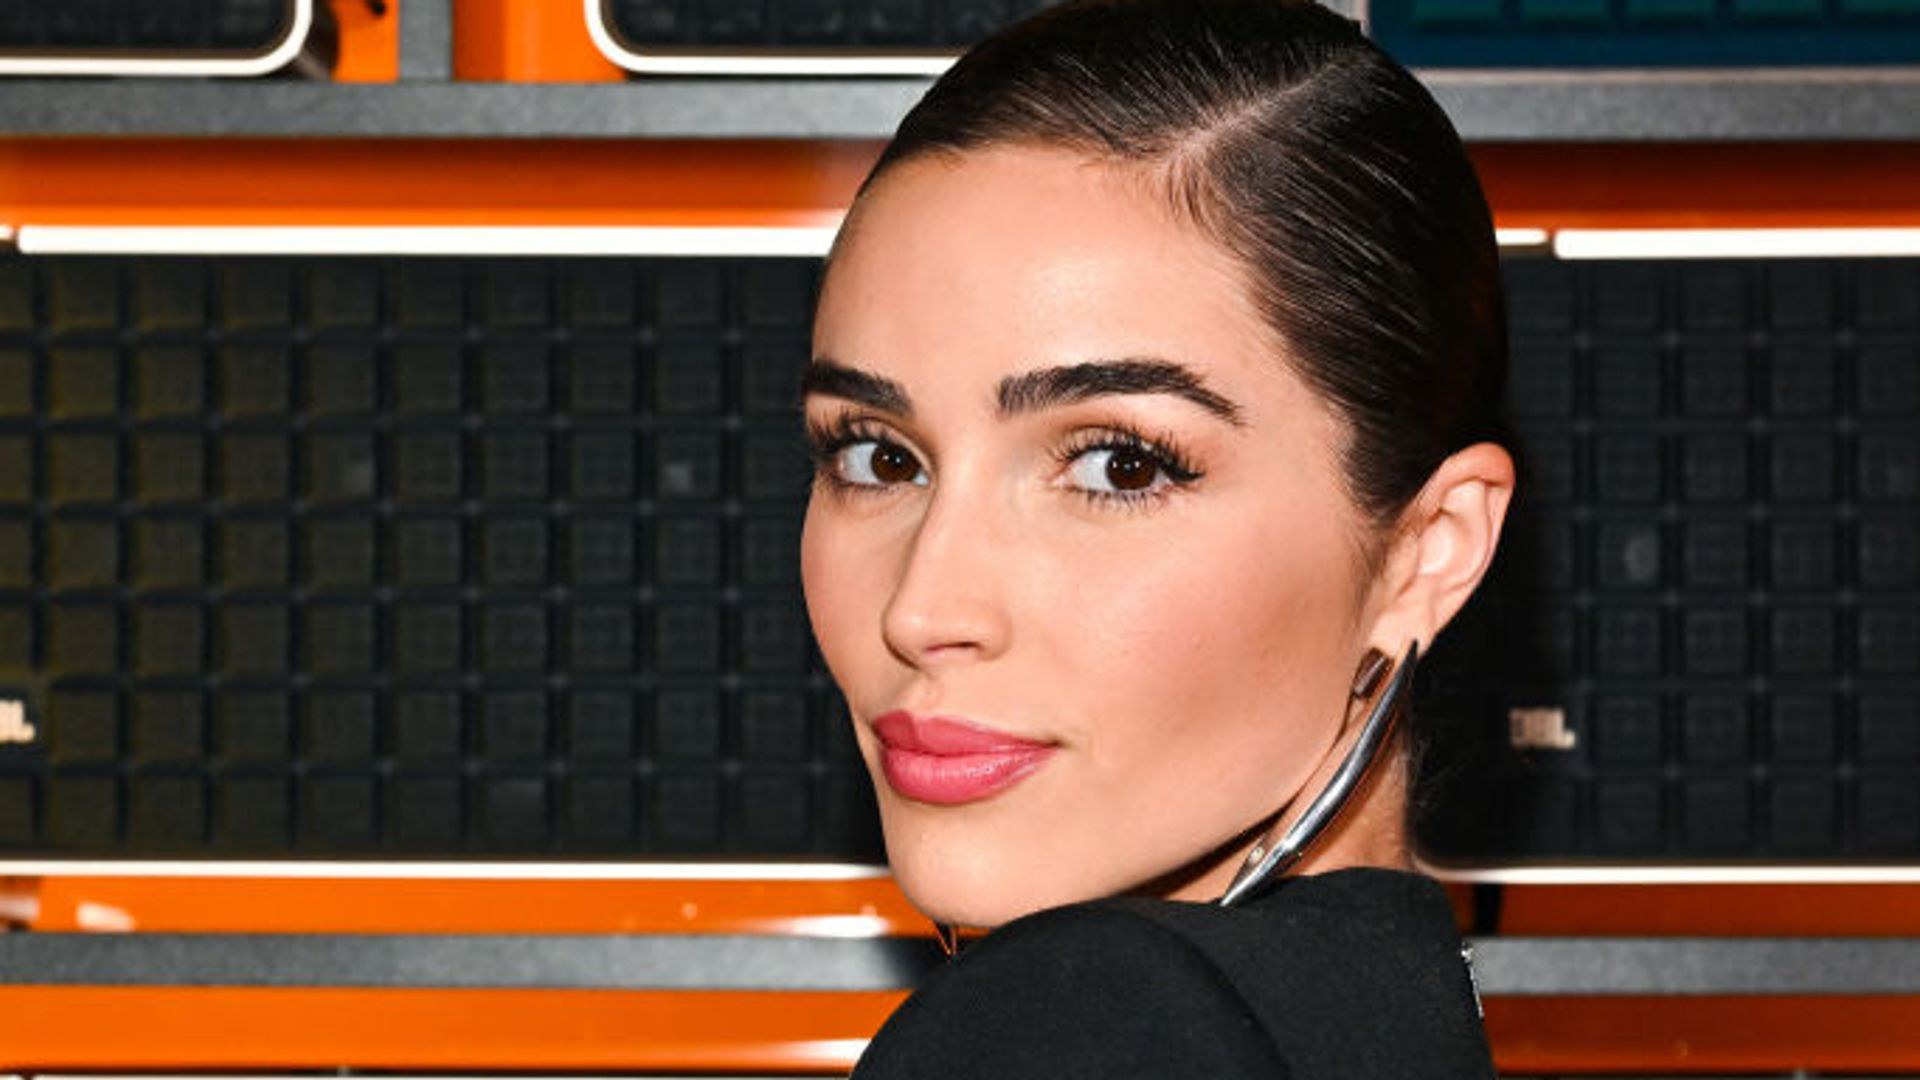 Olivia Culpo shares insight into extravagant bachelorette party: private plane, exotic dancers, and more